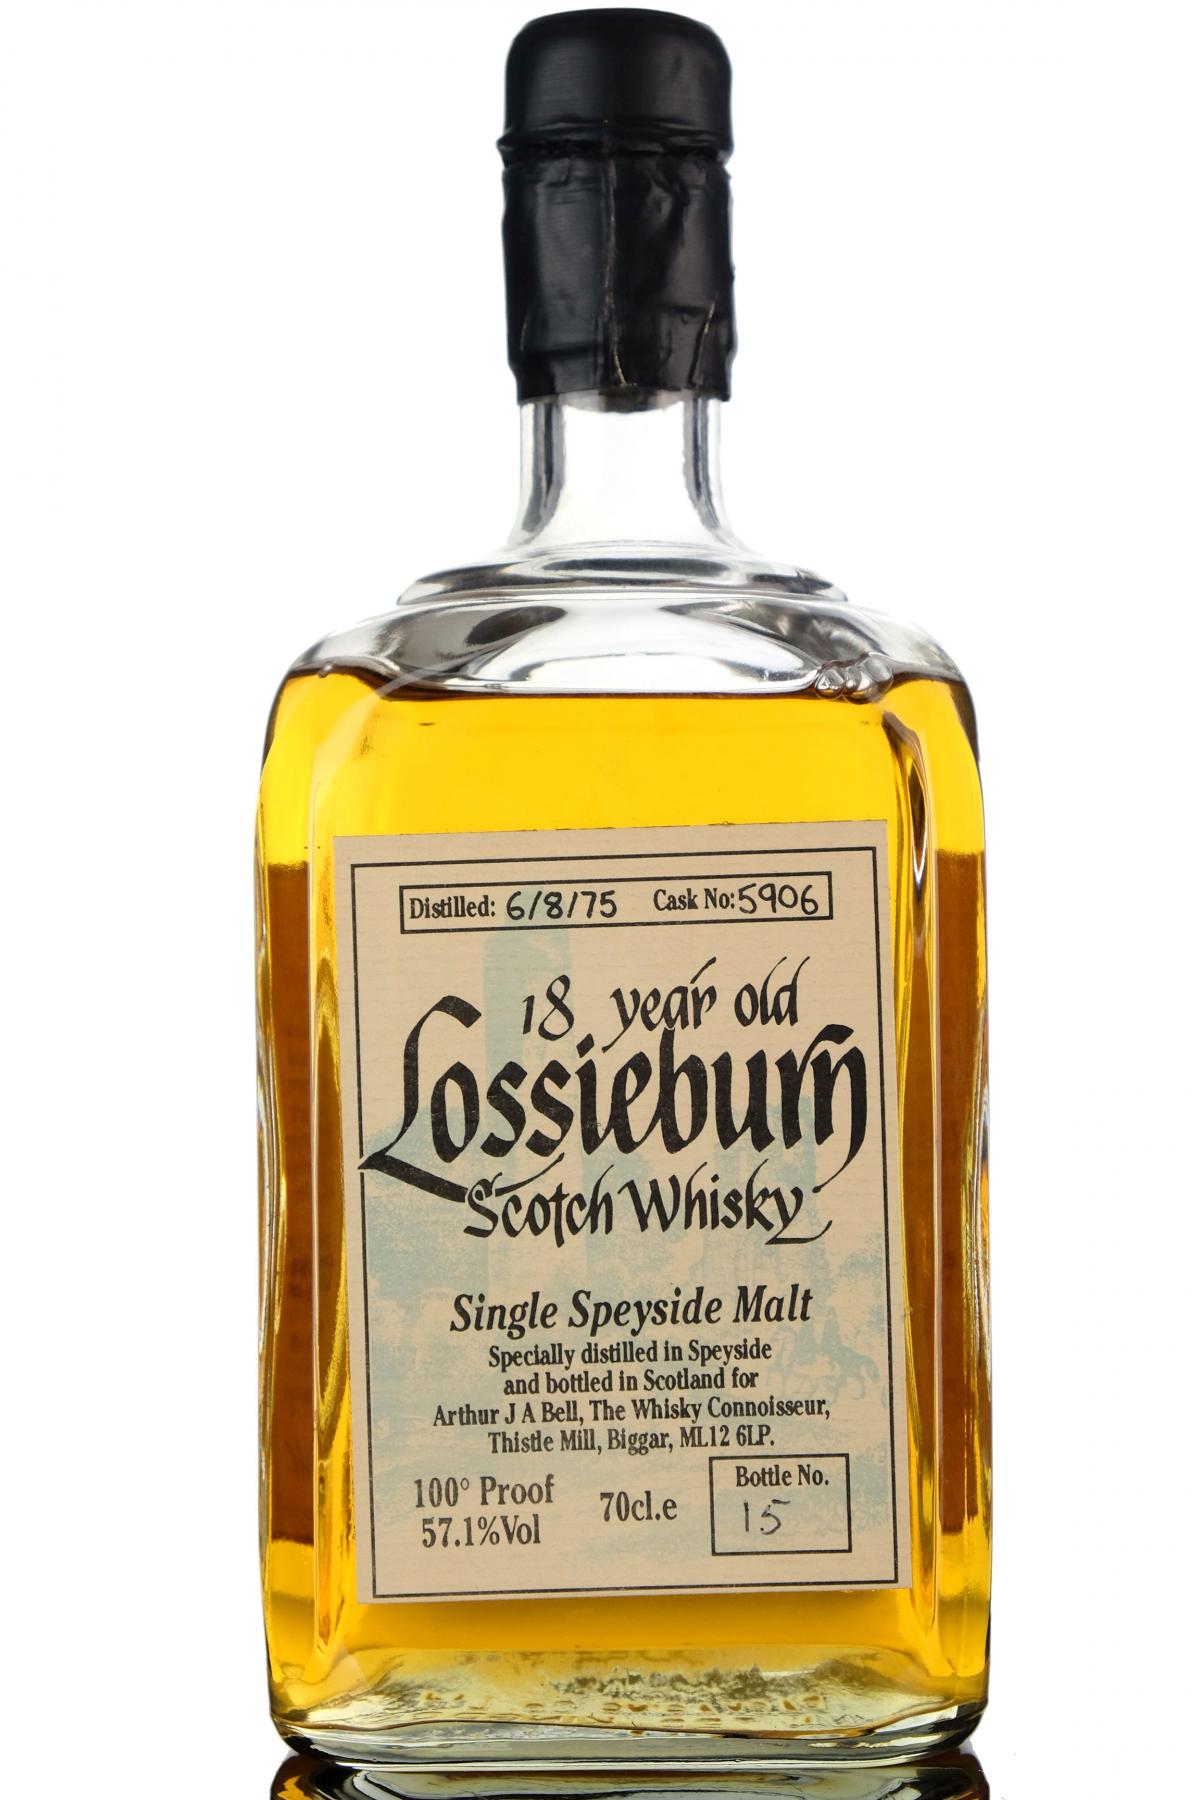 Lossieburn Glenlossie 1975 - 18 Year Old - The Whisky Connoisseur